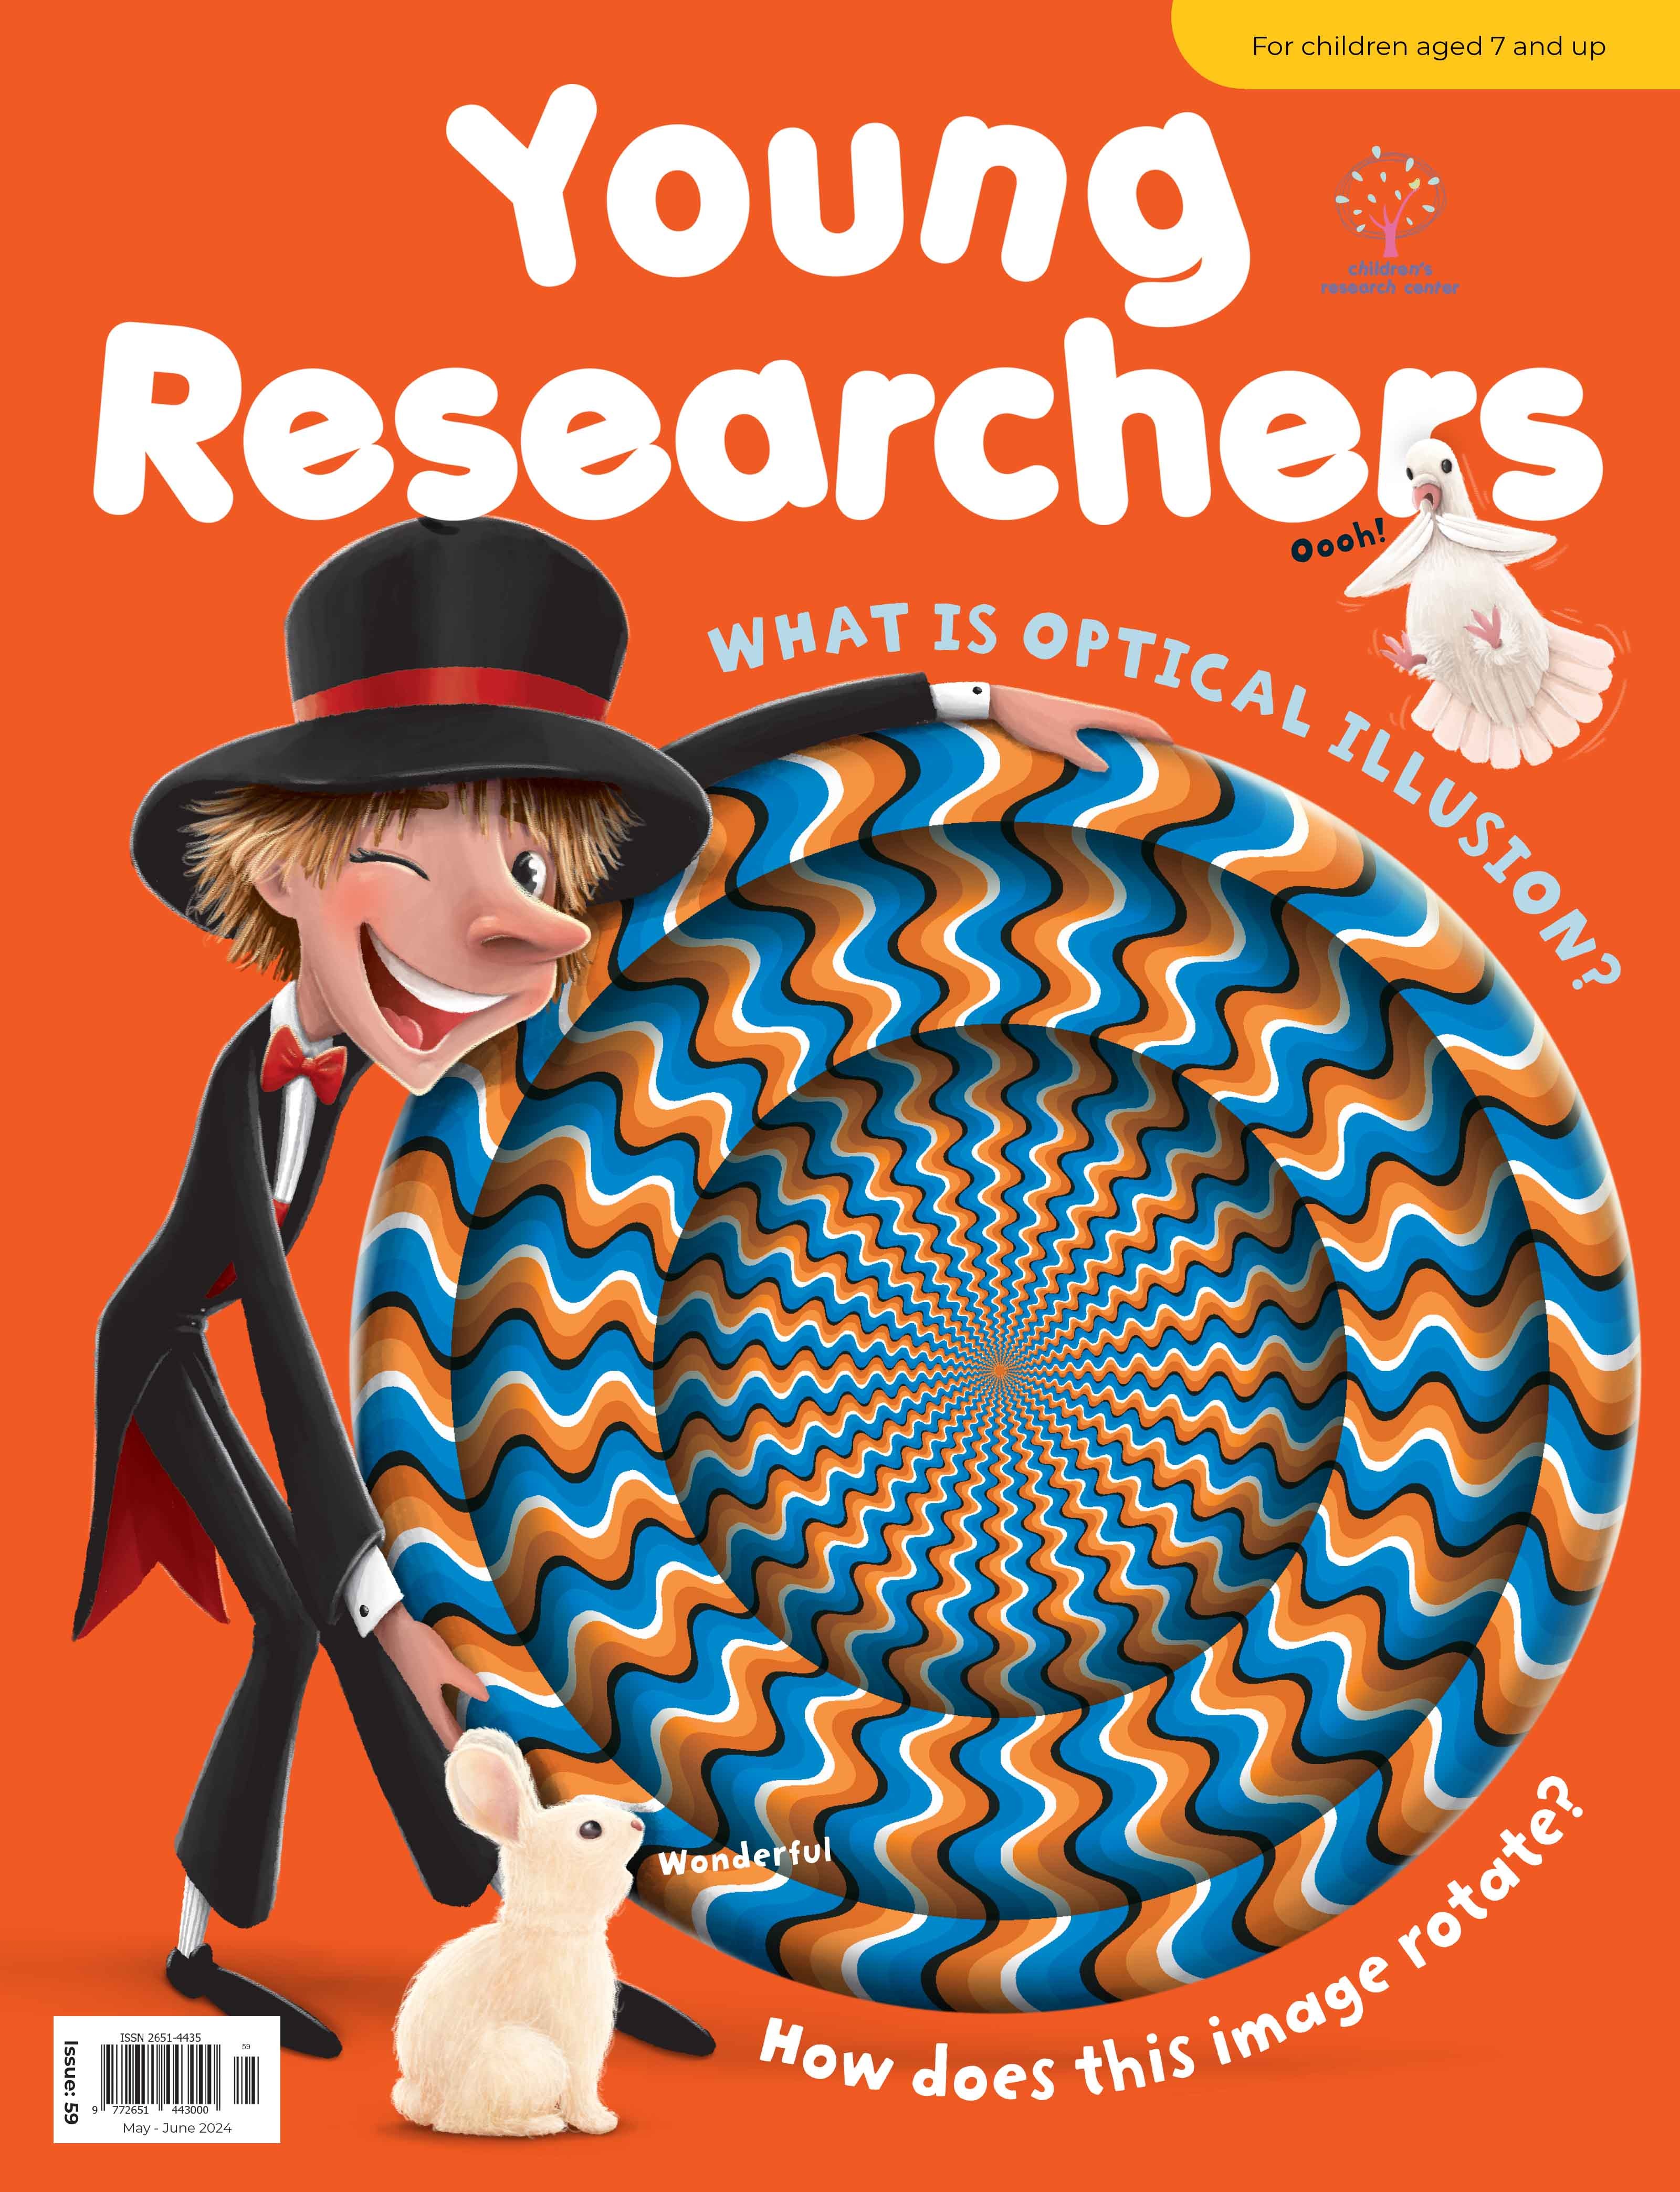 Young Researchers Issue 59: What Is Optical Illusion?